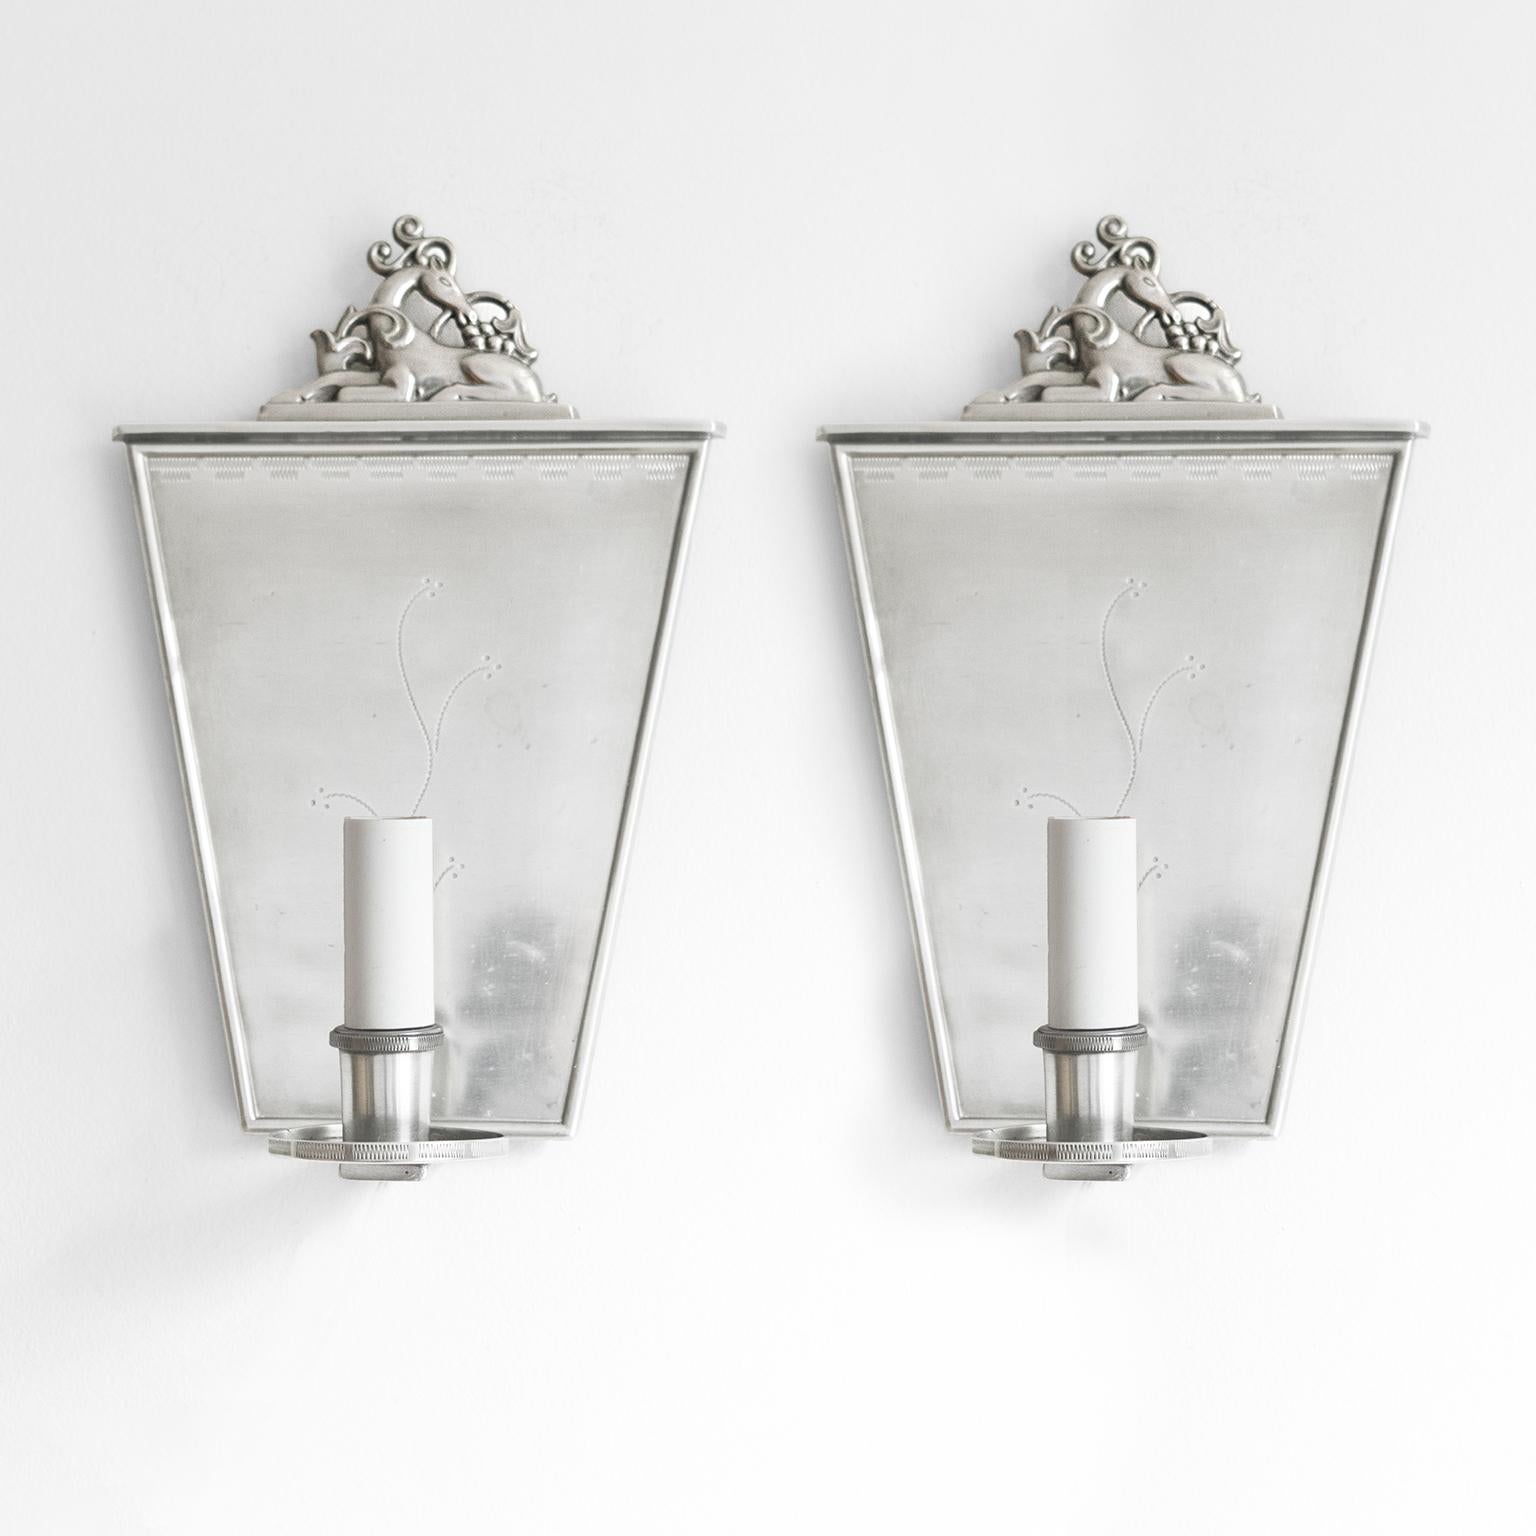 Pair of Swedish Grace polished pewter sconces by, C.G. Hallberg, Stockholm. The keystone shaped backplate is finely hand detail with a vine motif.. The crown depicts a reclining deer surrounded by plants. Each sconces has a single candle with a